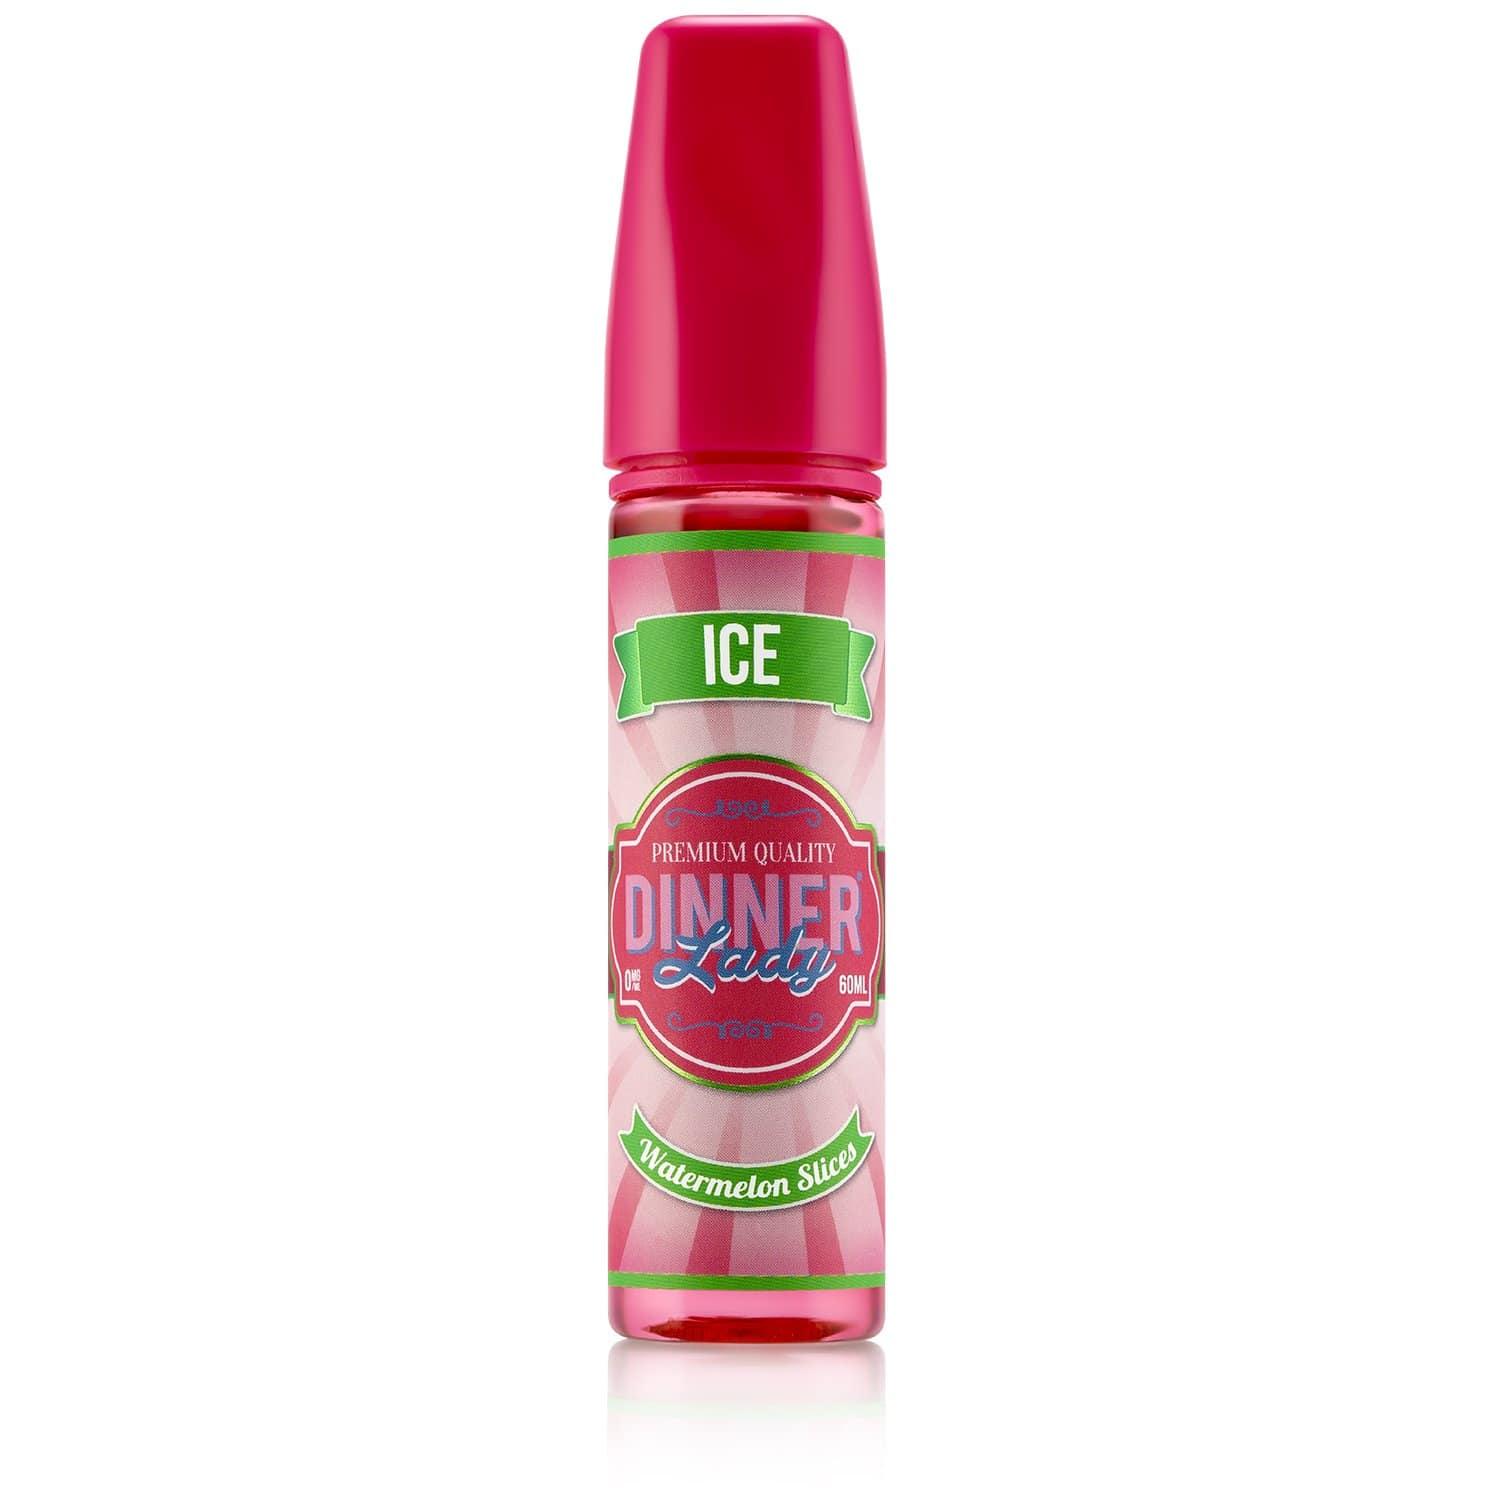 Buy Watermelon Slices Ice by Tuck Shop - Dinner Lady - Wick And Wire Co Melbourne Vape Shop, Victoria Australia